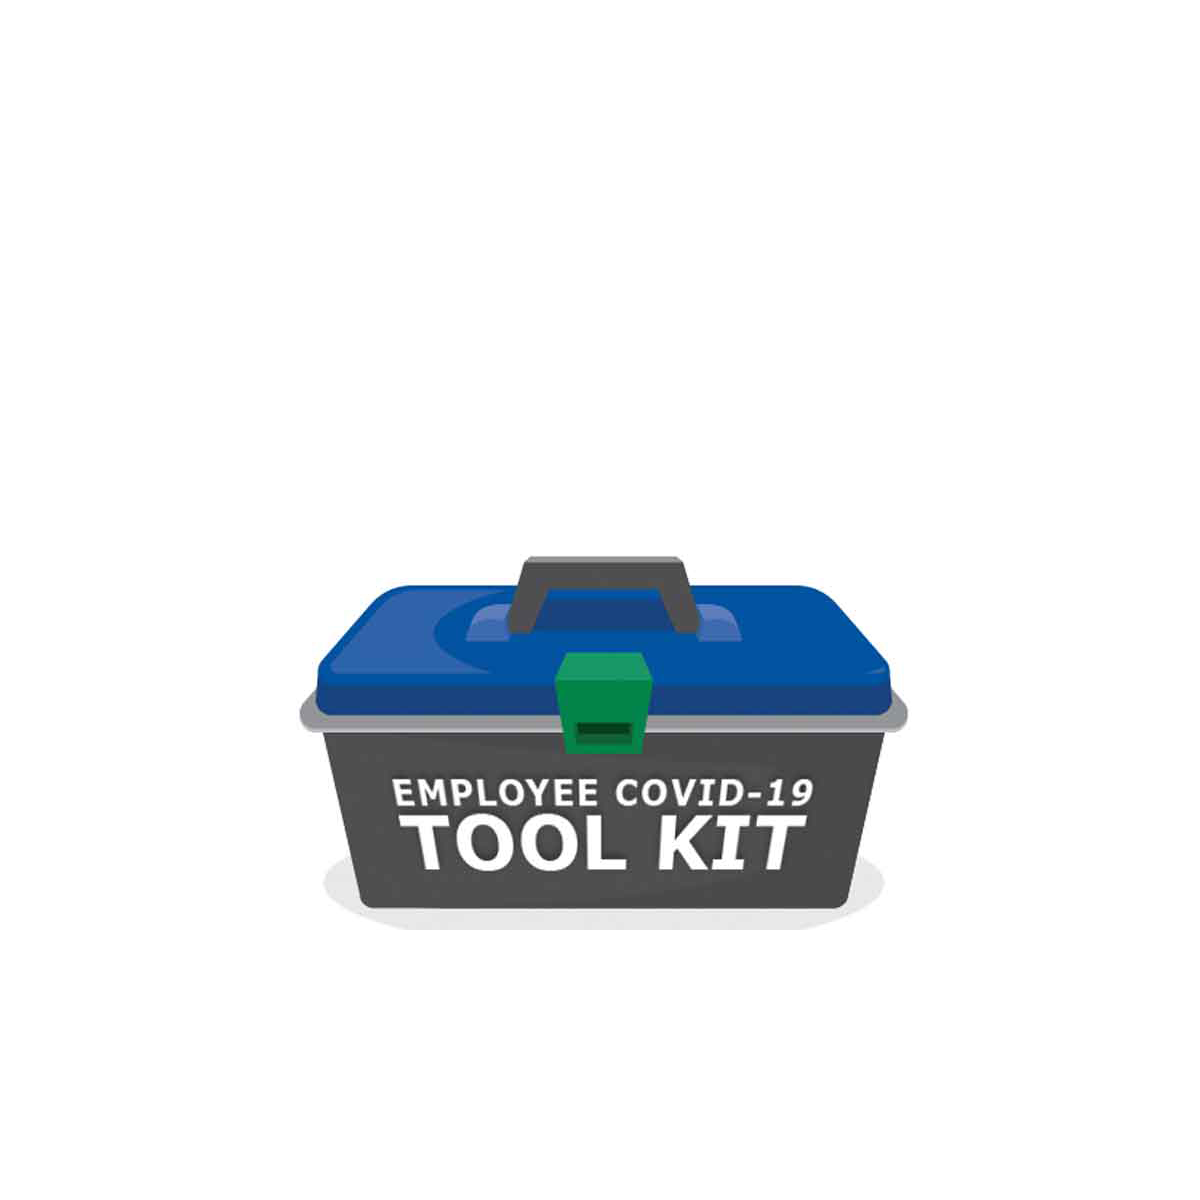 Toolkit for COVID-19